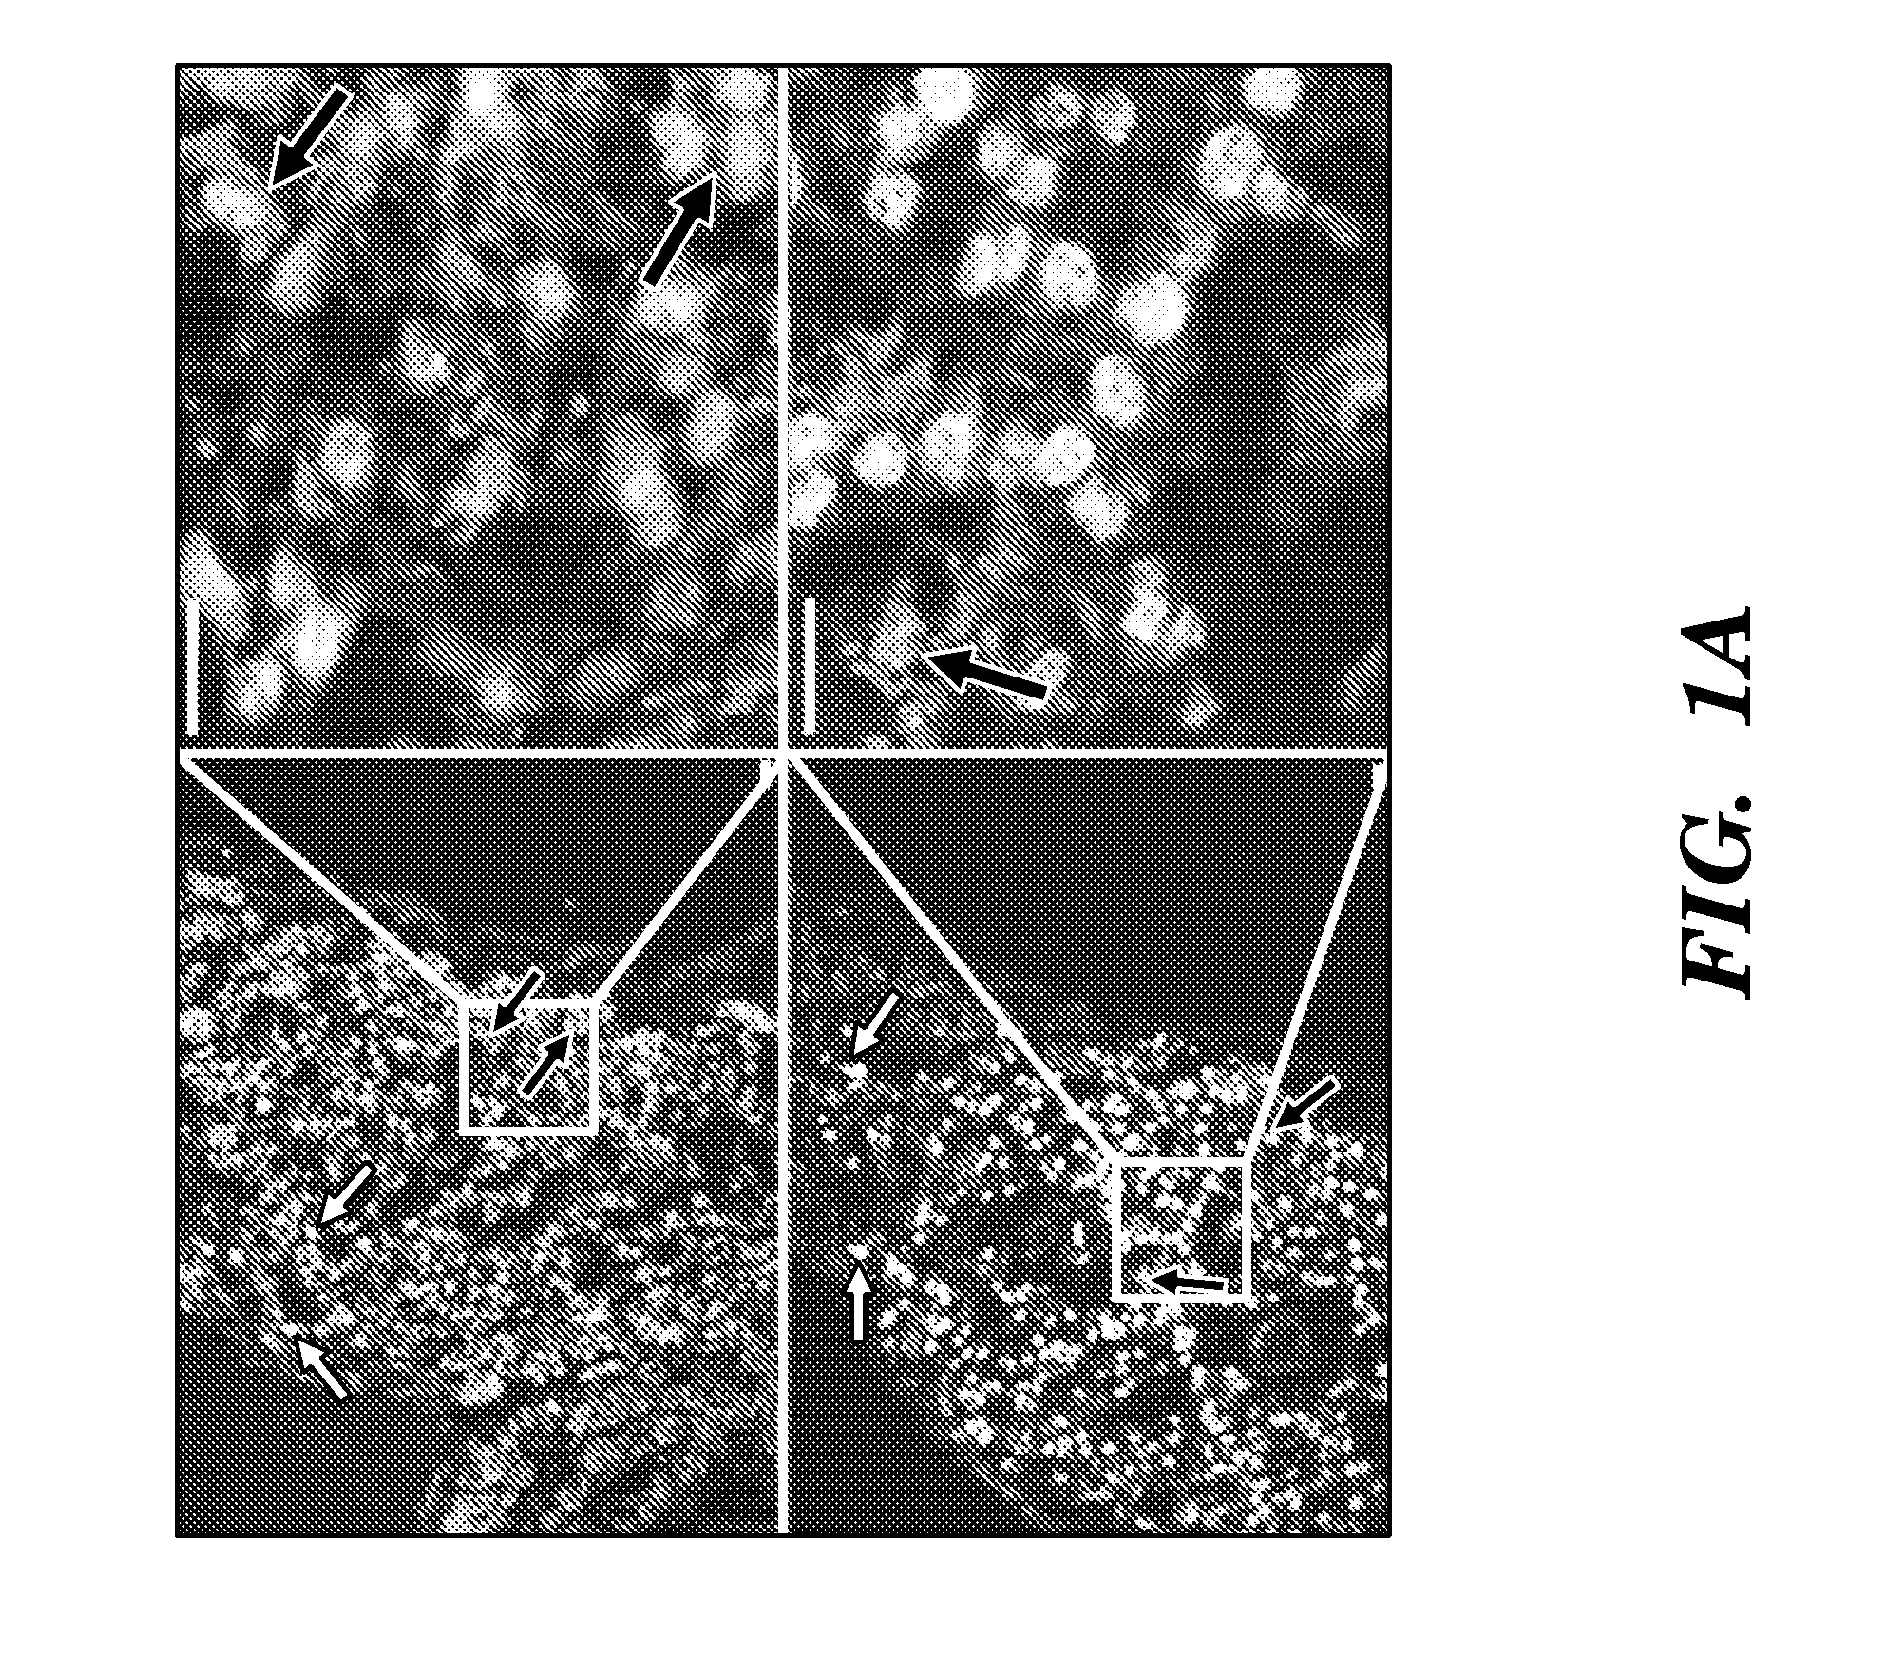 Generation of vascularized human heart tissue and uses thereof